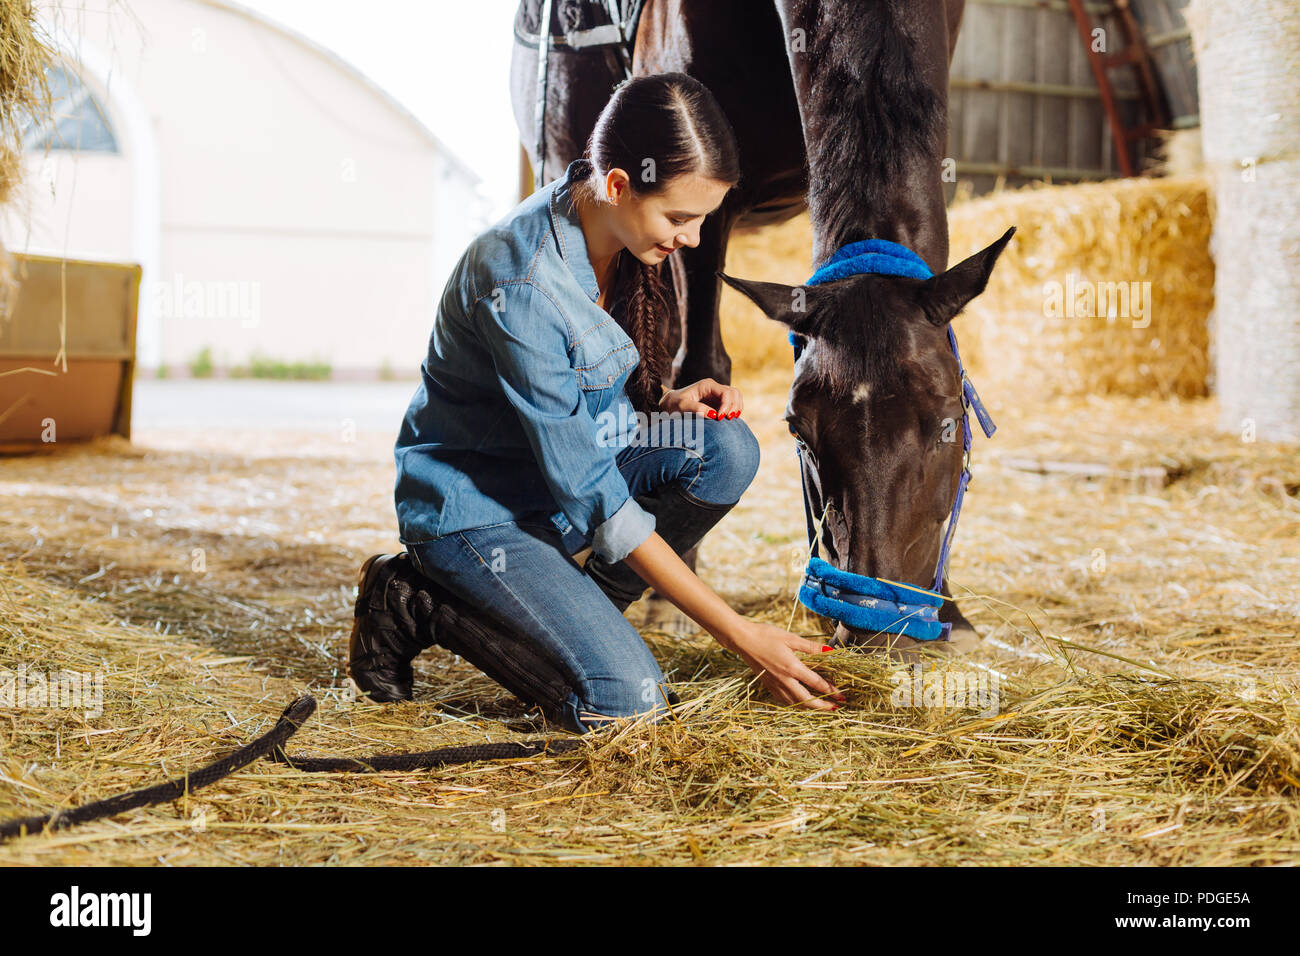 Beautiful horsewoman feeding brown horse with some straw Stock Photo